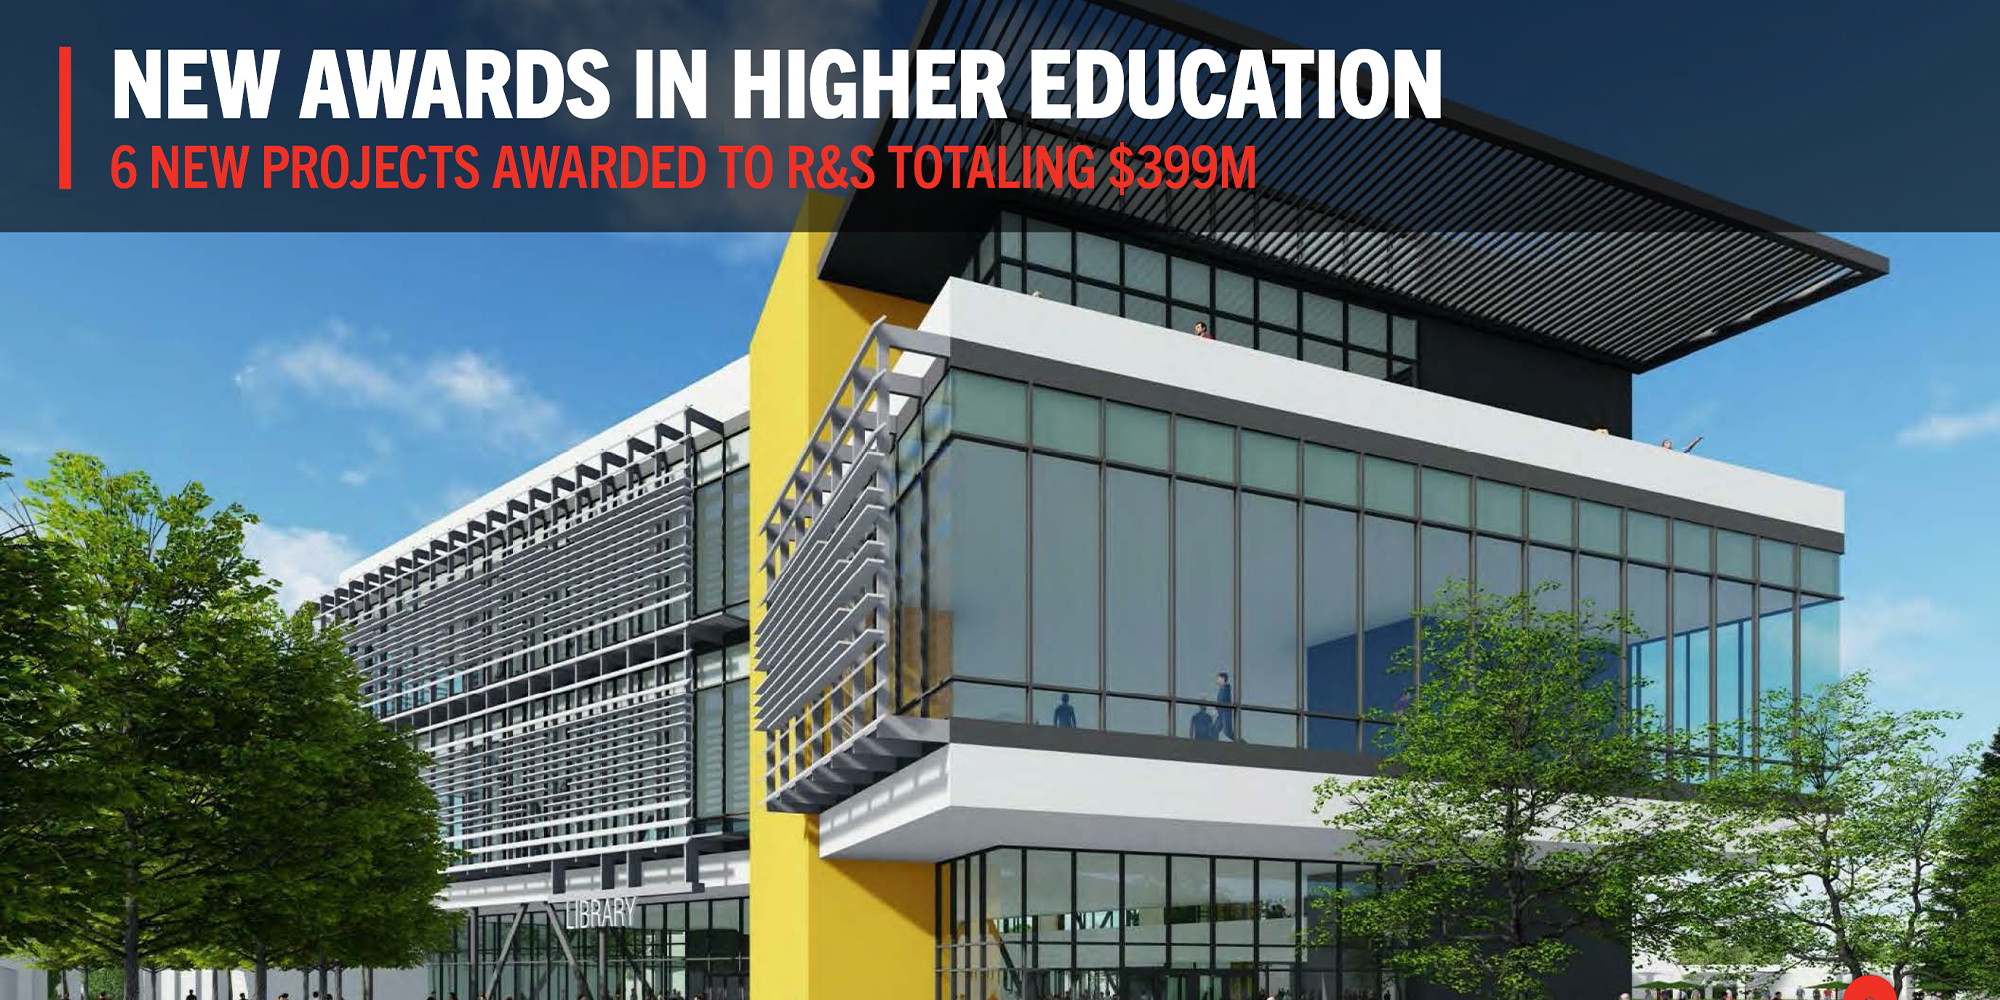 R&S Awarded $399M in Higher Education Projects